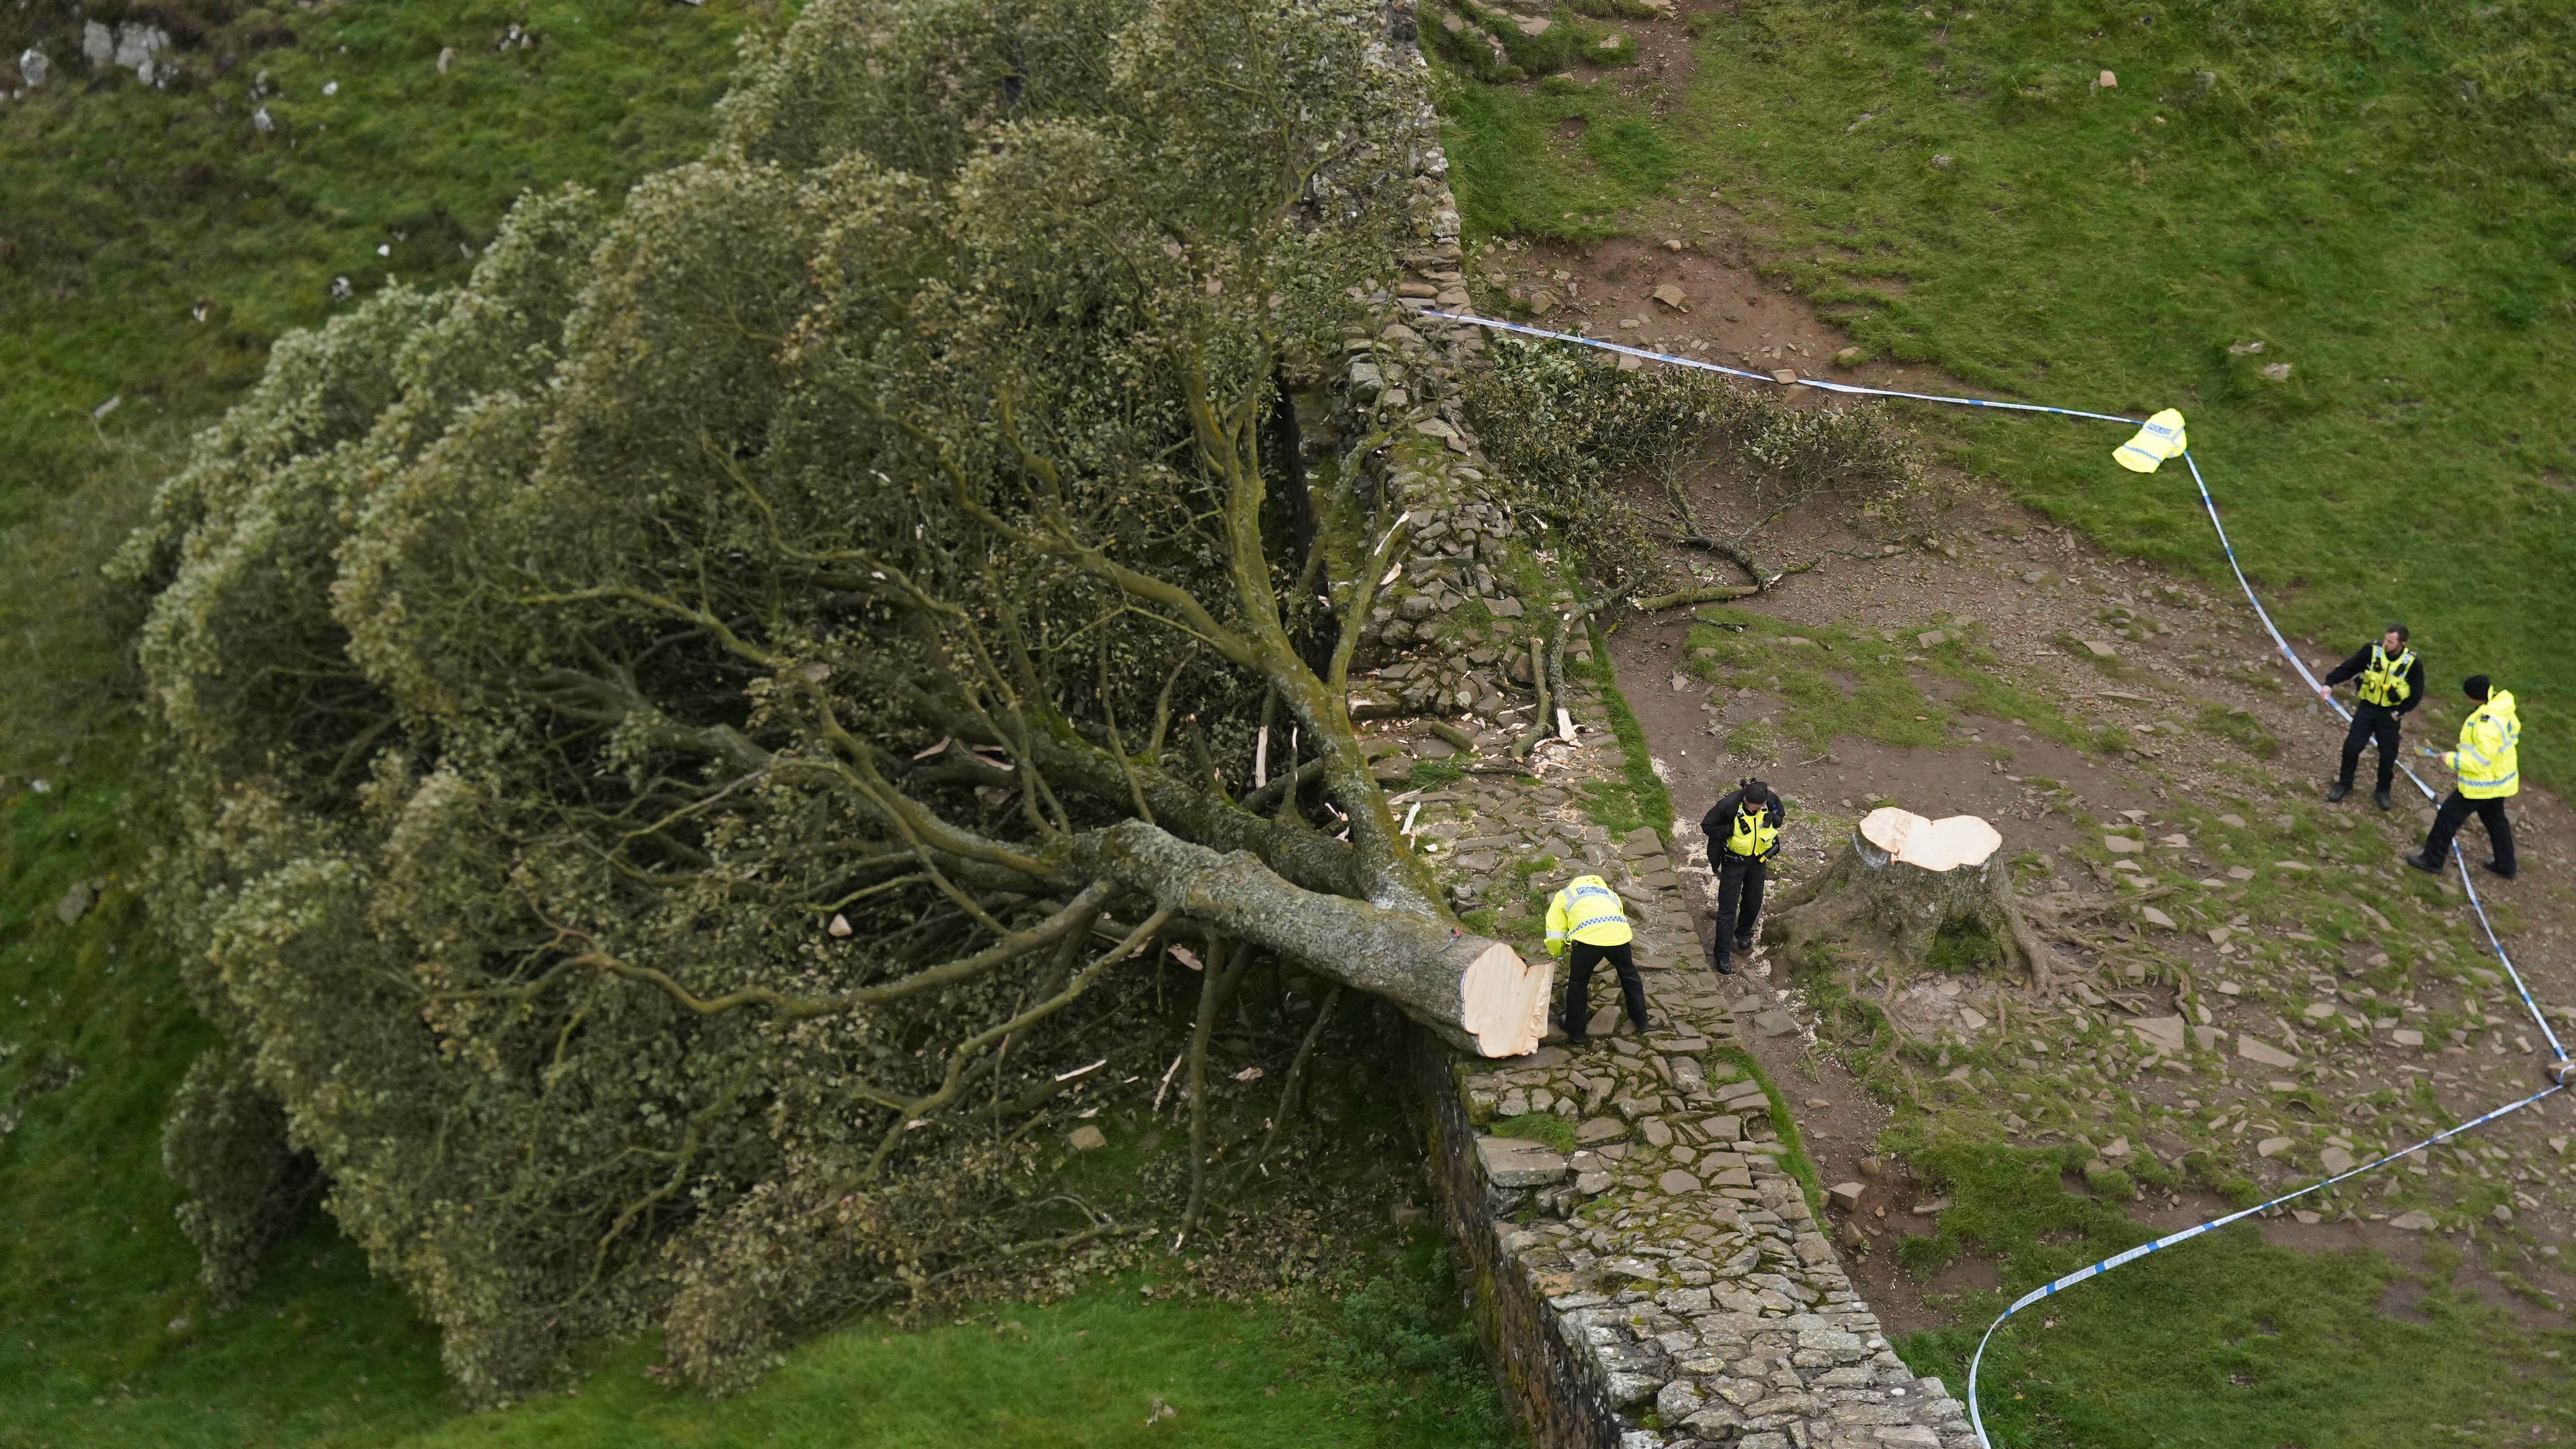 Two men in court over Sycamore Gap tree felling